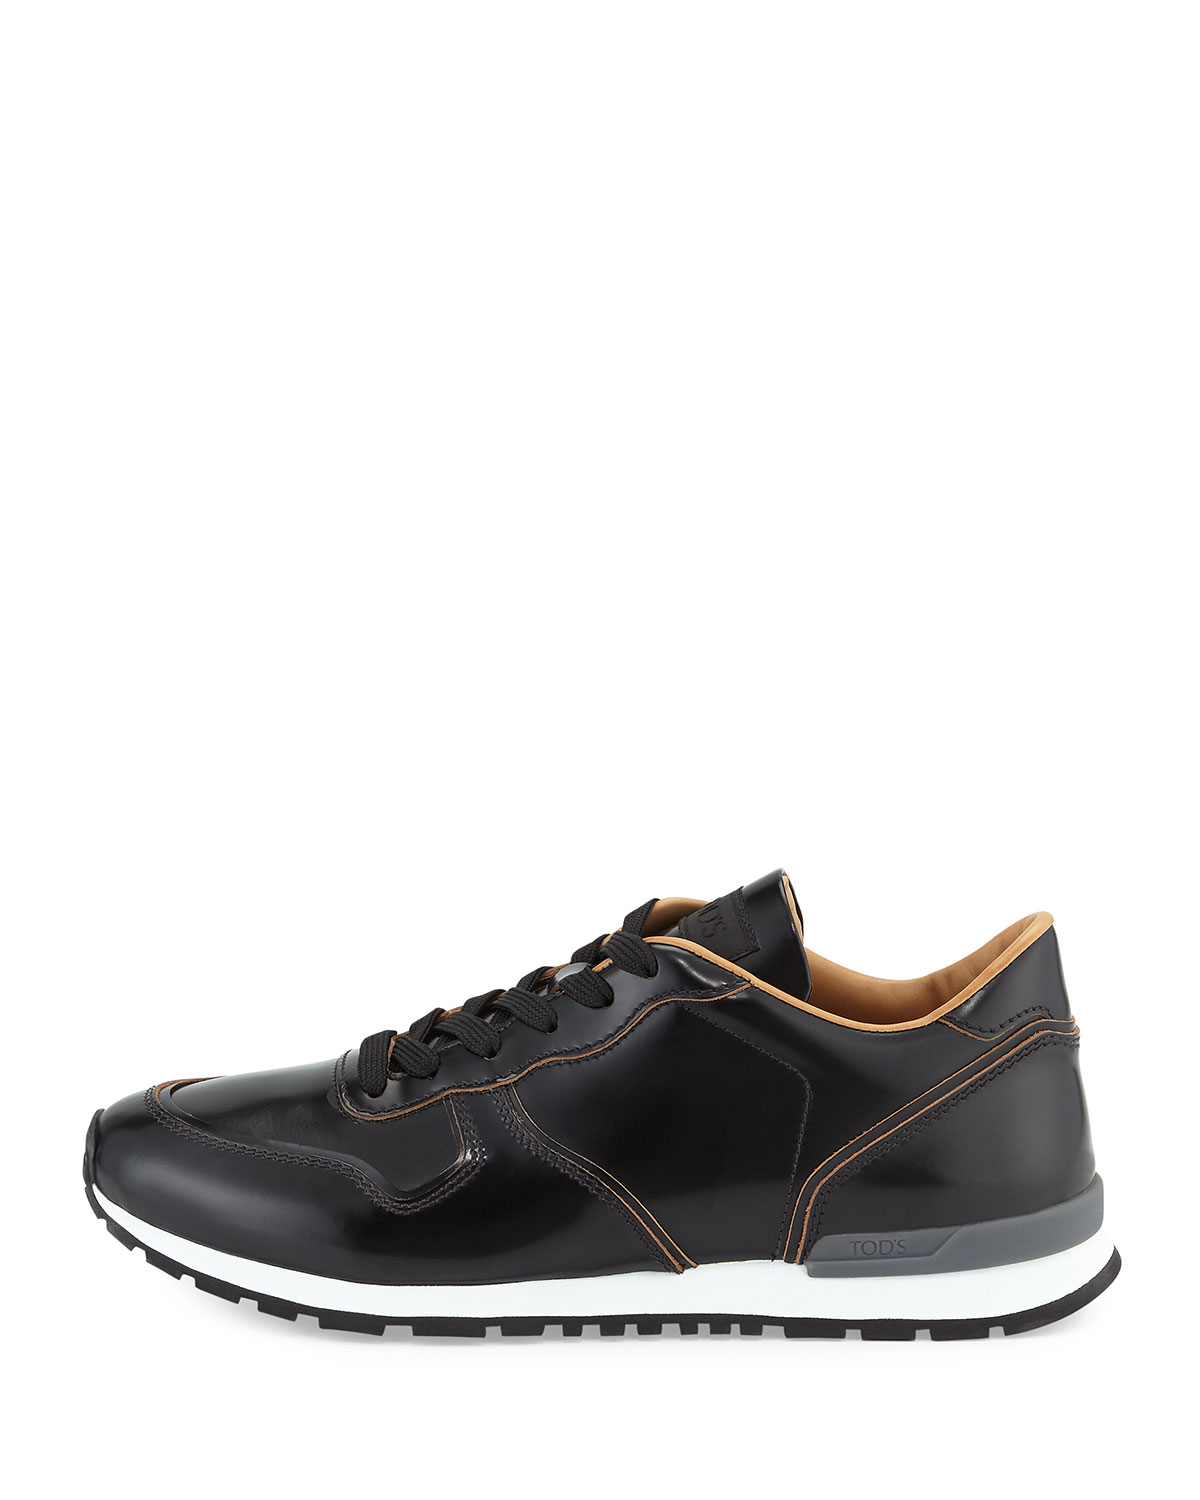 tod's black leather sneakers